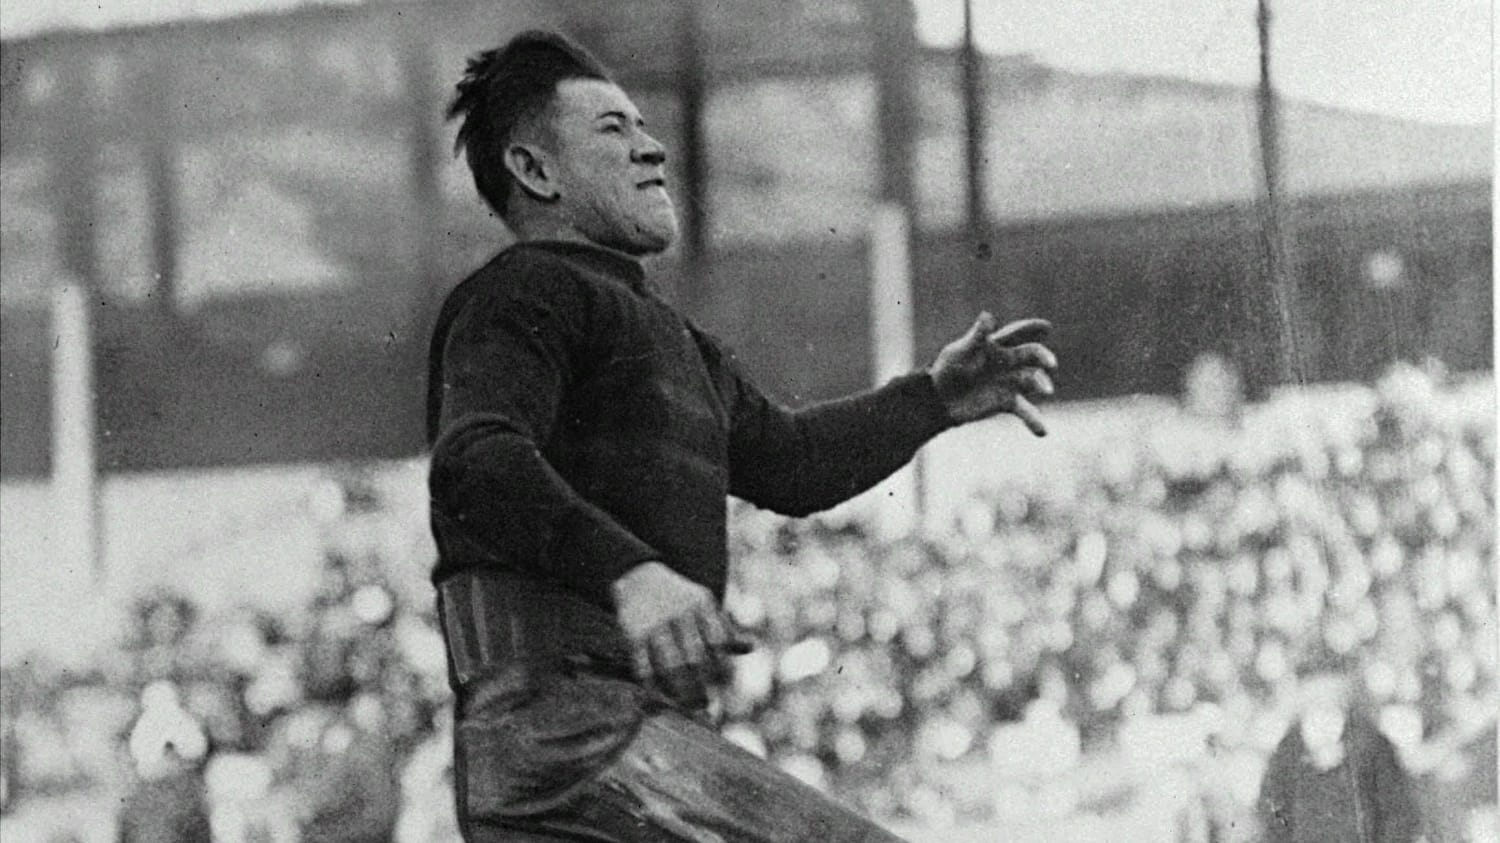 Jim Thorpe petition drive starts to restore his status as sole winner of 1912 Olympic gold medals